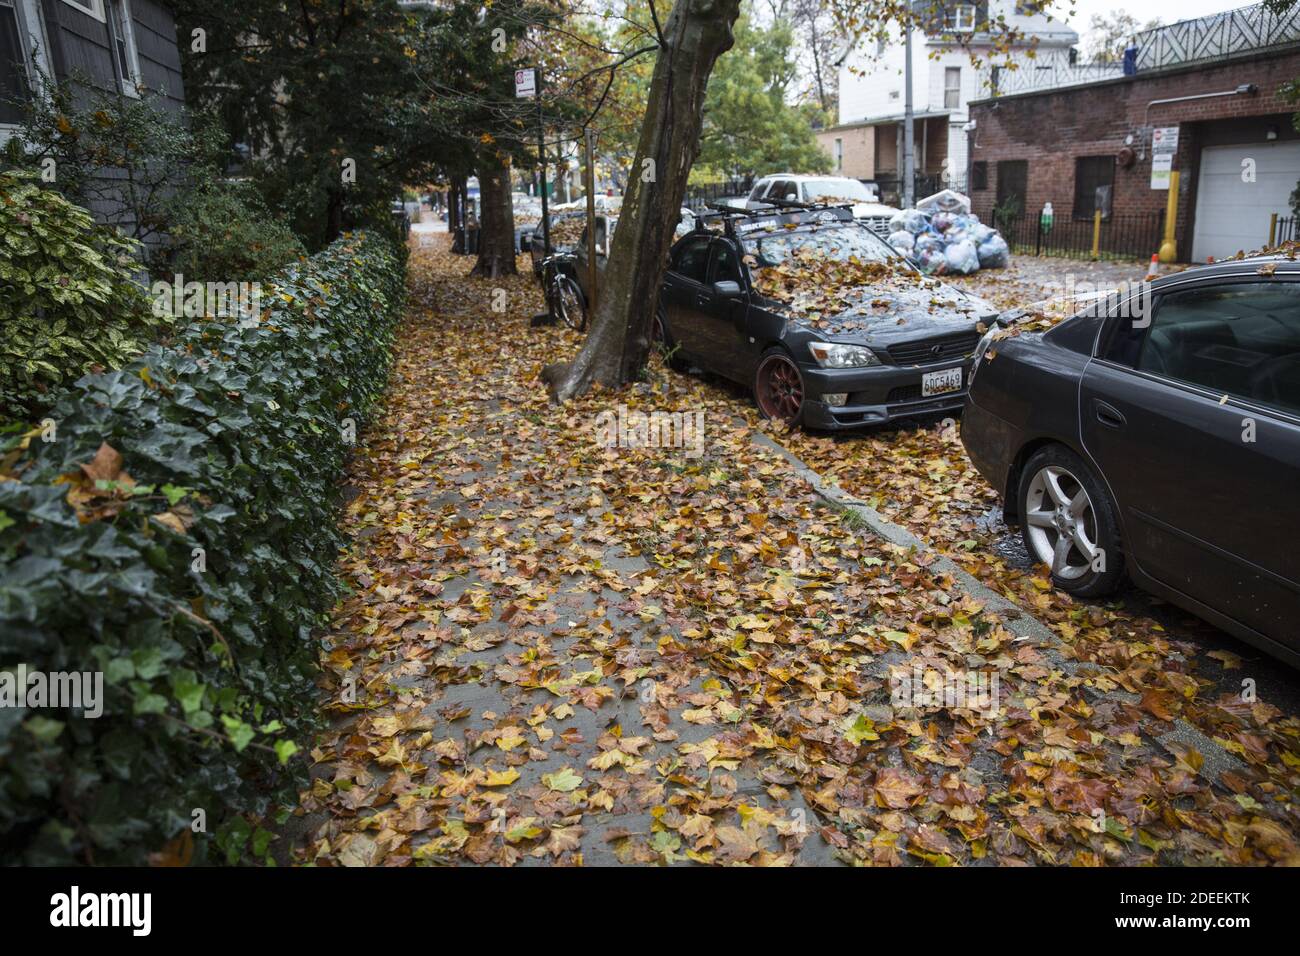 Autumn leaves cover the sidewalks on the tree-lined residential streets in many neighborhoods of Brooklyn, New York. Stock Photo